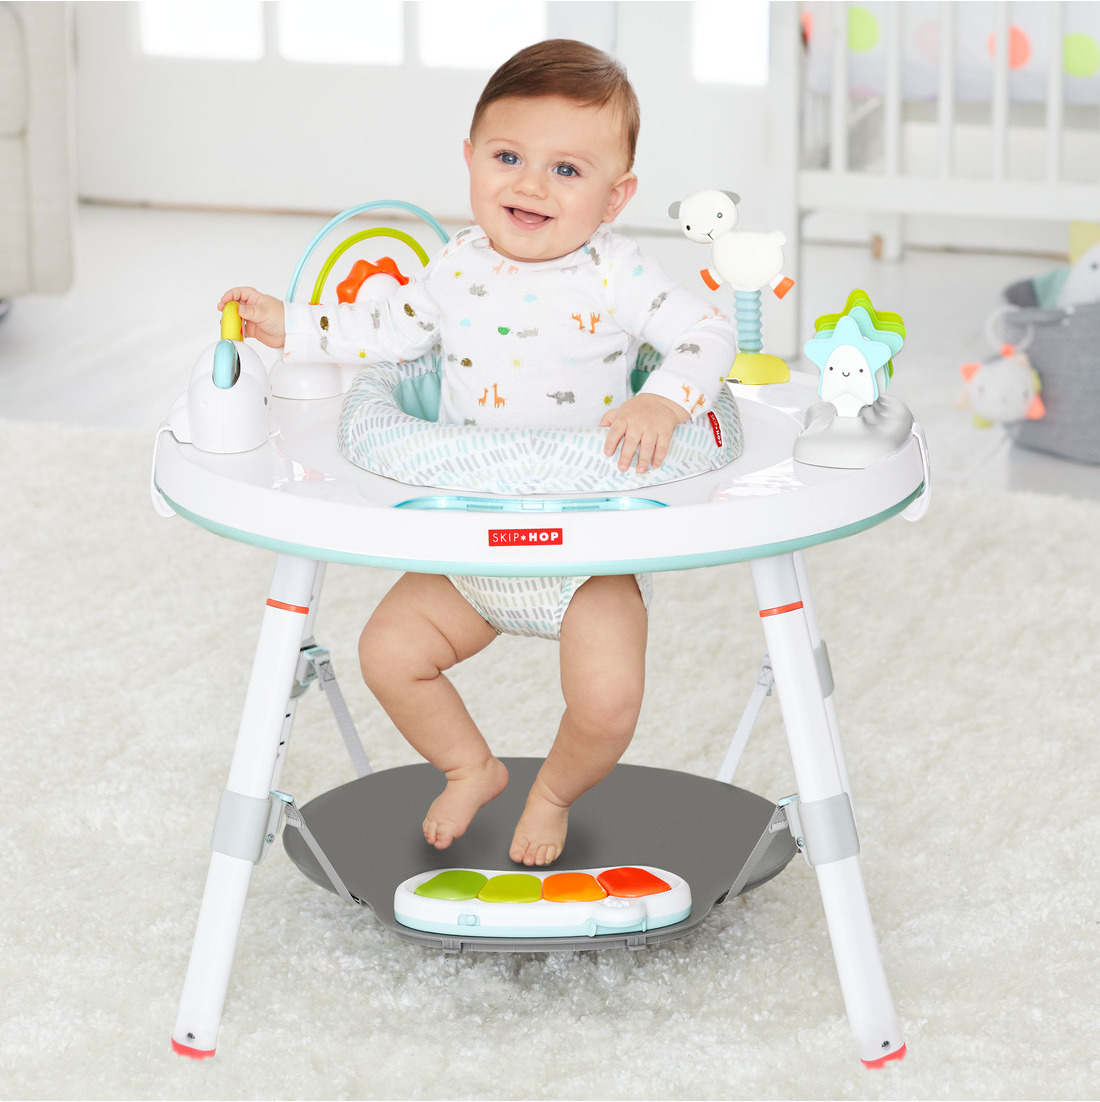 skip and hop activity table